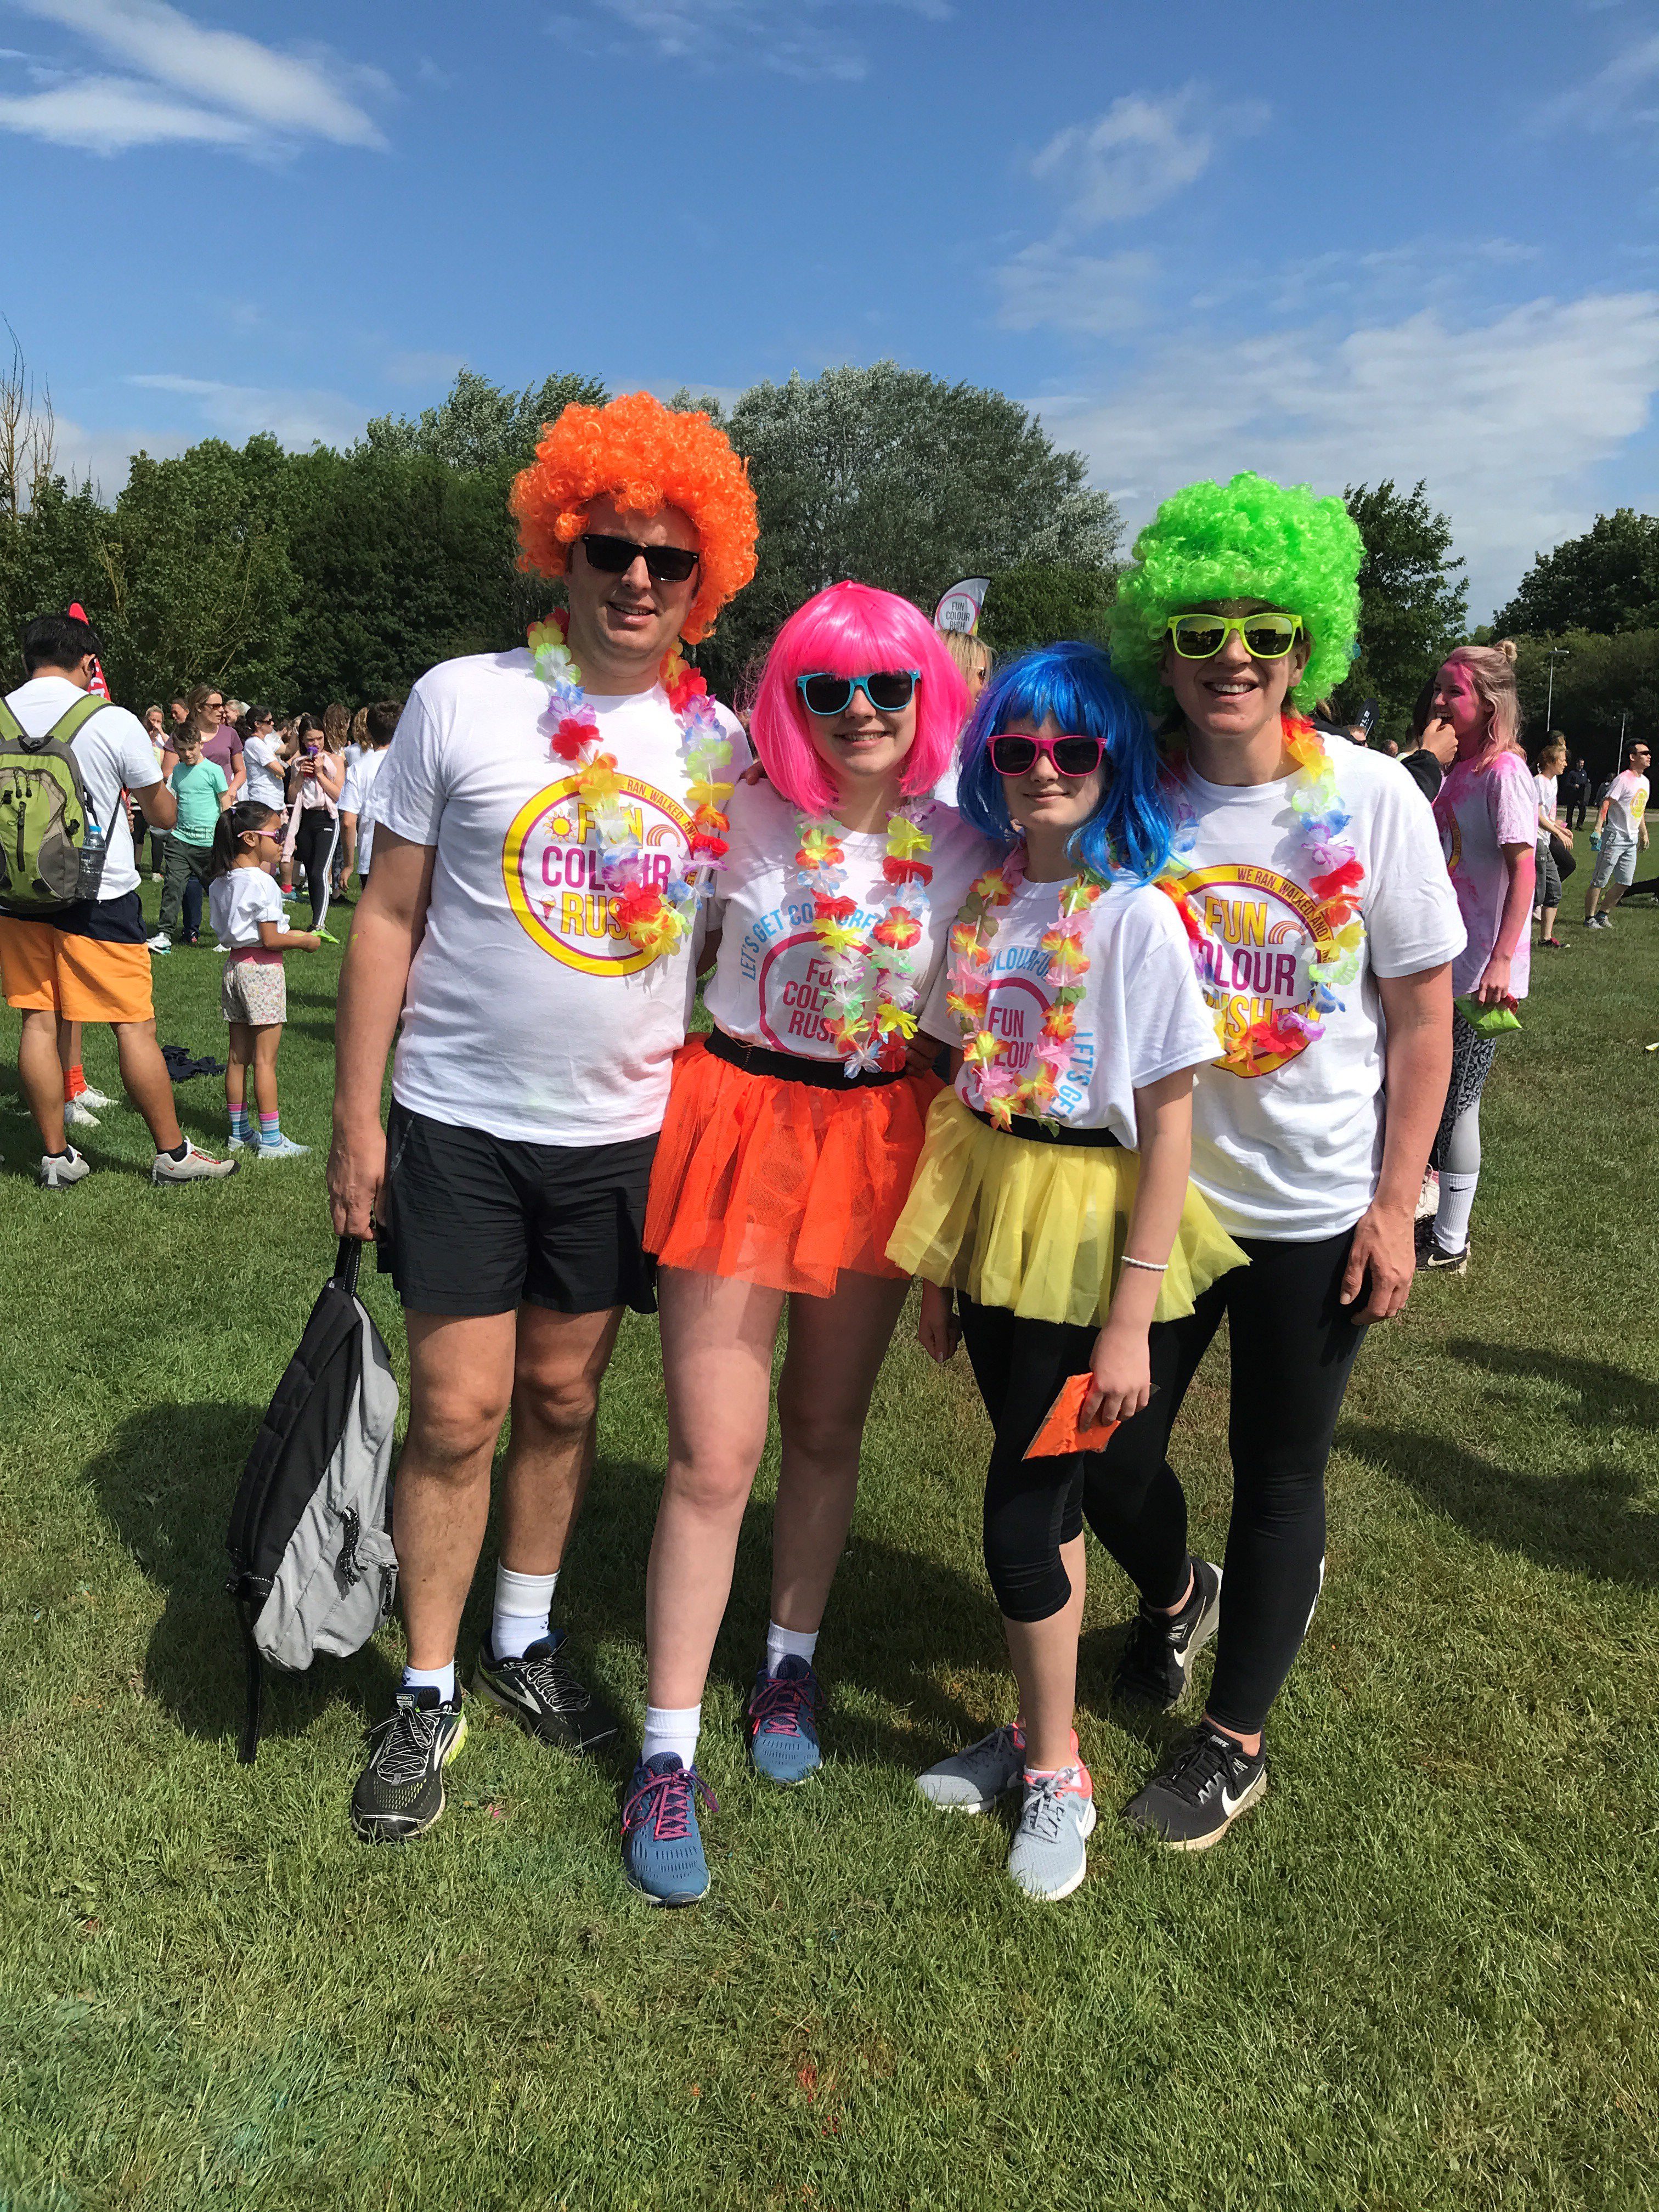 Group of people with colourful wigs and sunglasses on with fun colour rush tshirts on